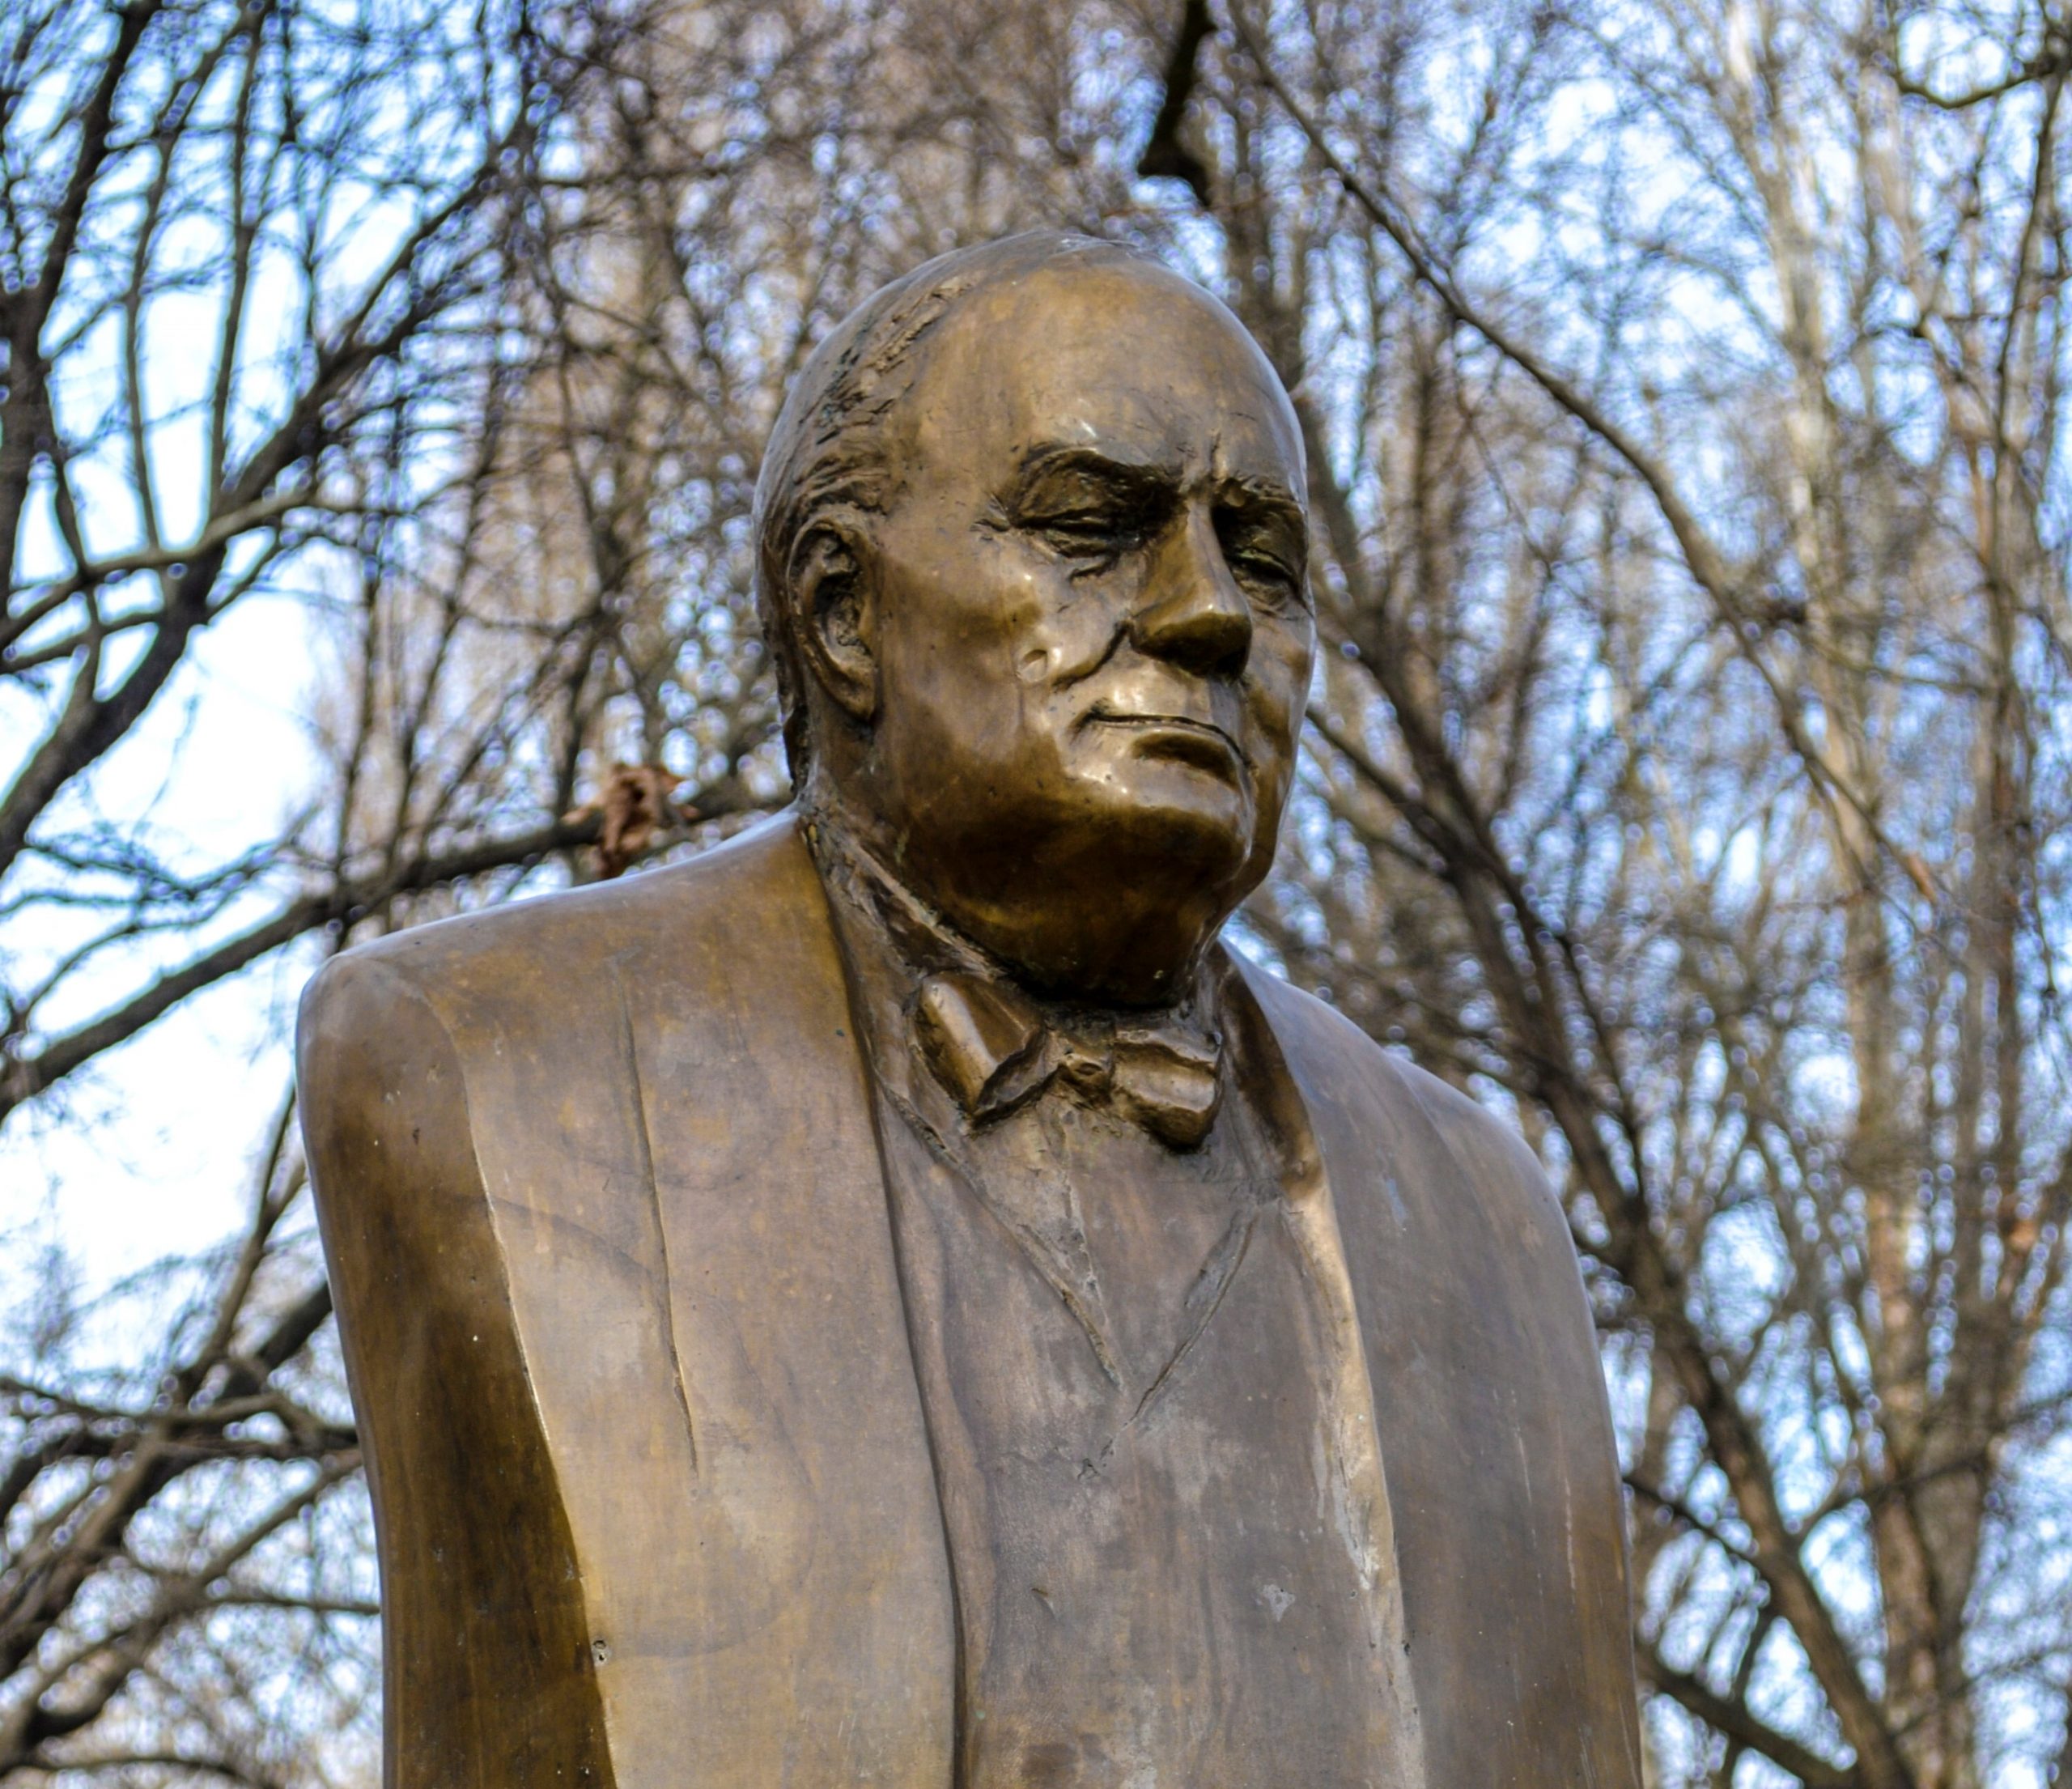 Churchill Statue in Budapest Damaged with Words 'Nazi', 'Racist' and 'BLM' Spraypainted on It